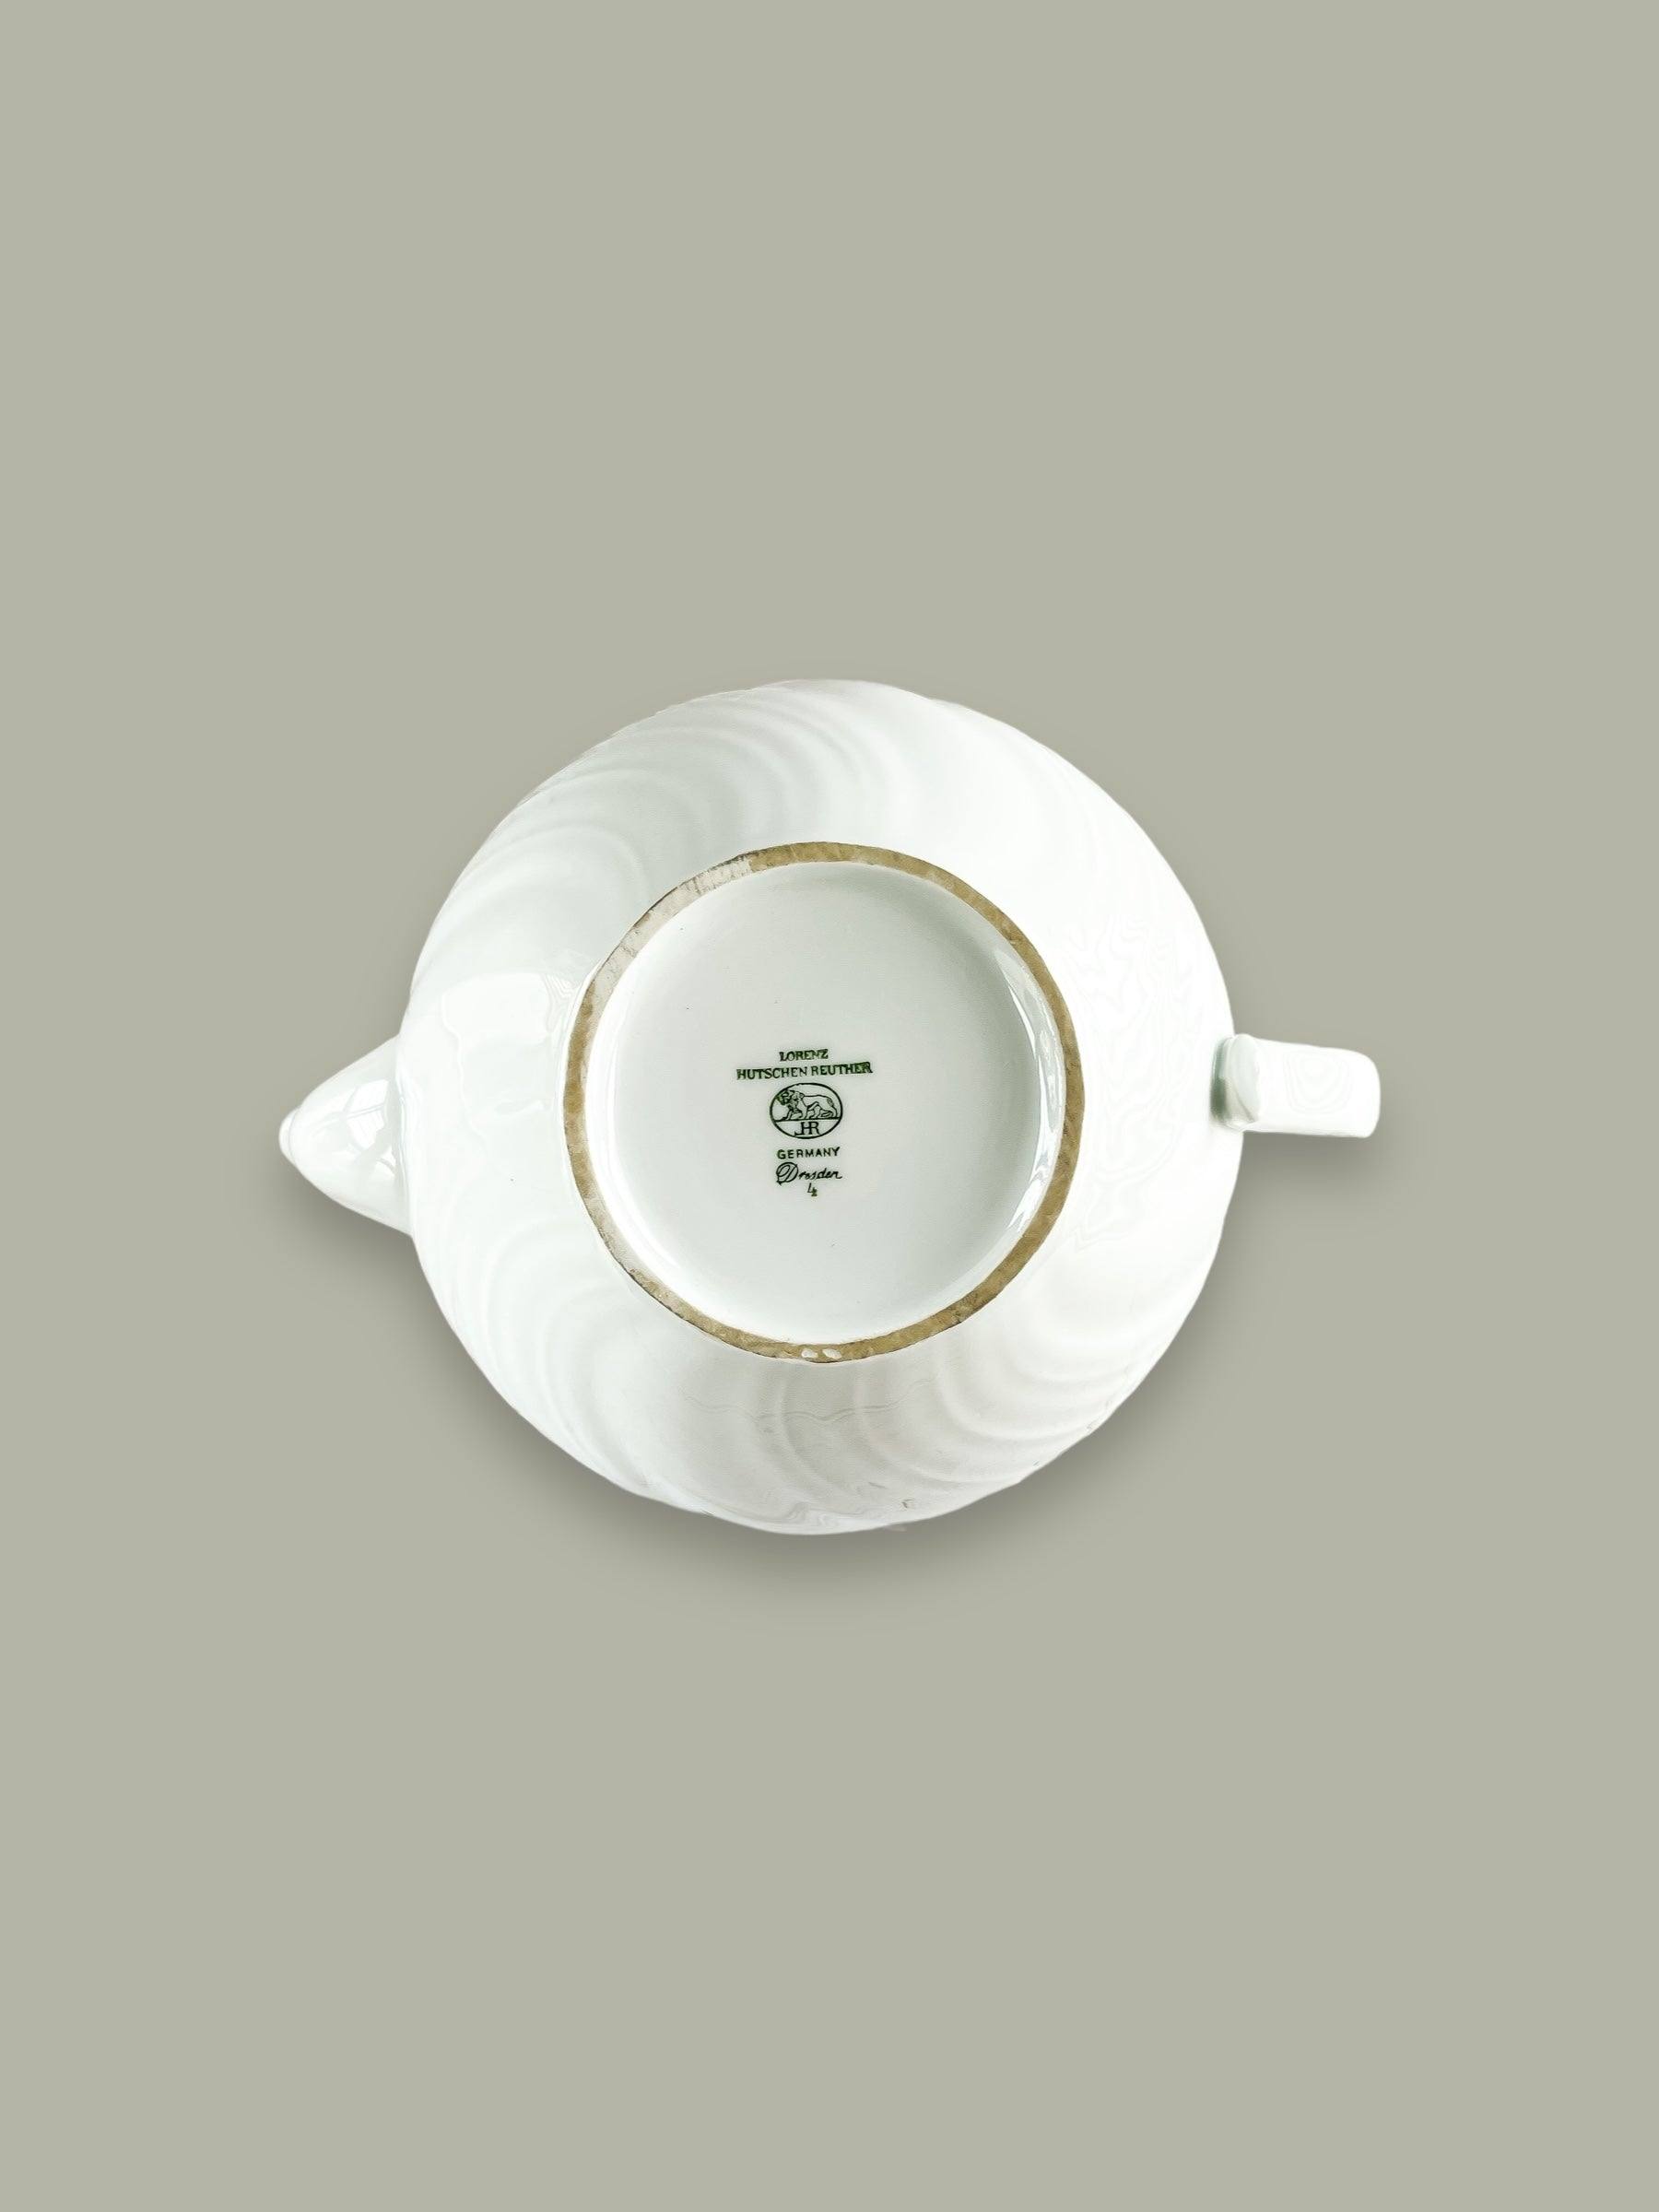 Hutschenreuther Teapot - ‘Dresden’ Collection in All White - SOSC Home